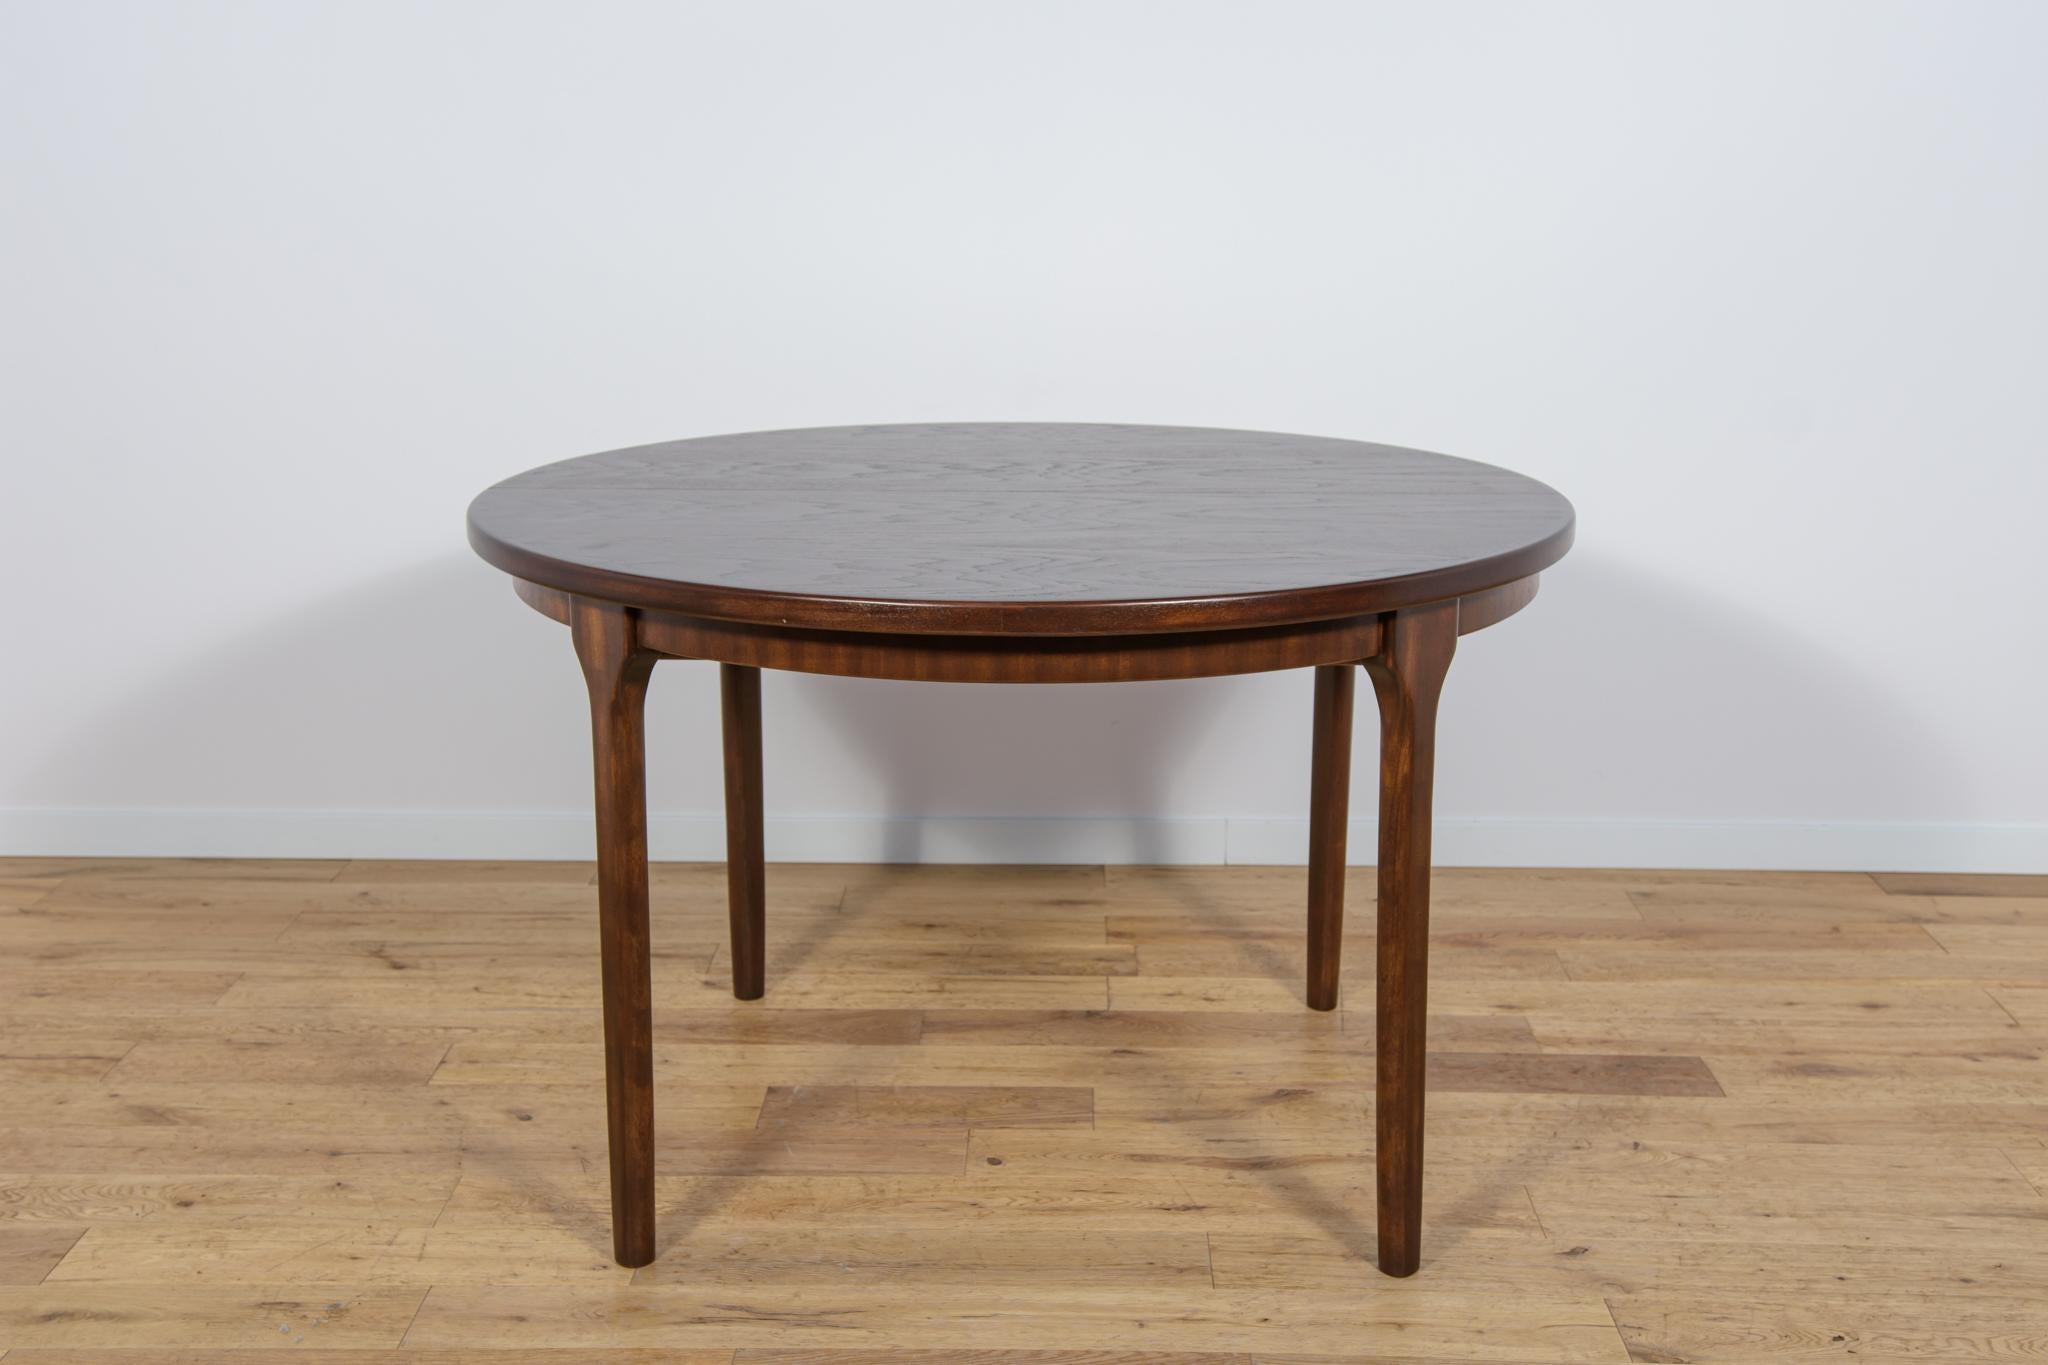 This round extendable dining table was produced by McIntosh in the 1960s. Teak elements cleaned from the old surface and painted rosewood stain and finished with strong semi matte lacquer. The dining table has a mechanism that facilitates unfolding.